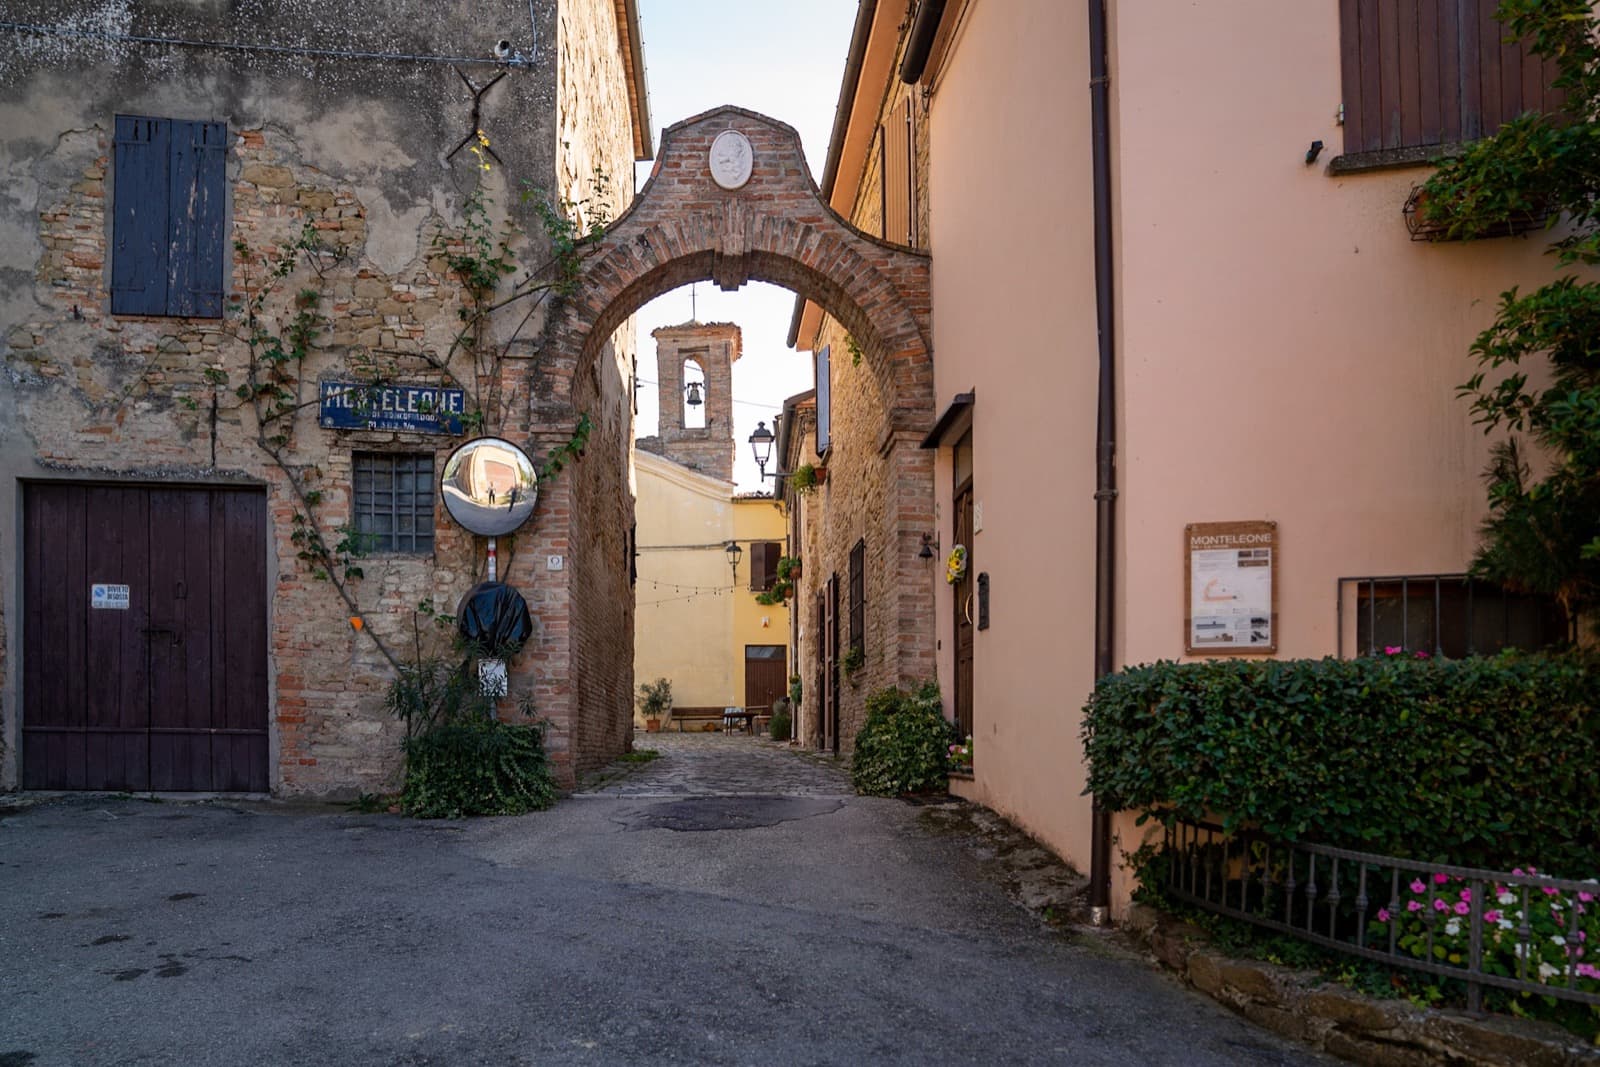 A weekend in the hills around Cesena: what to see and where to go